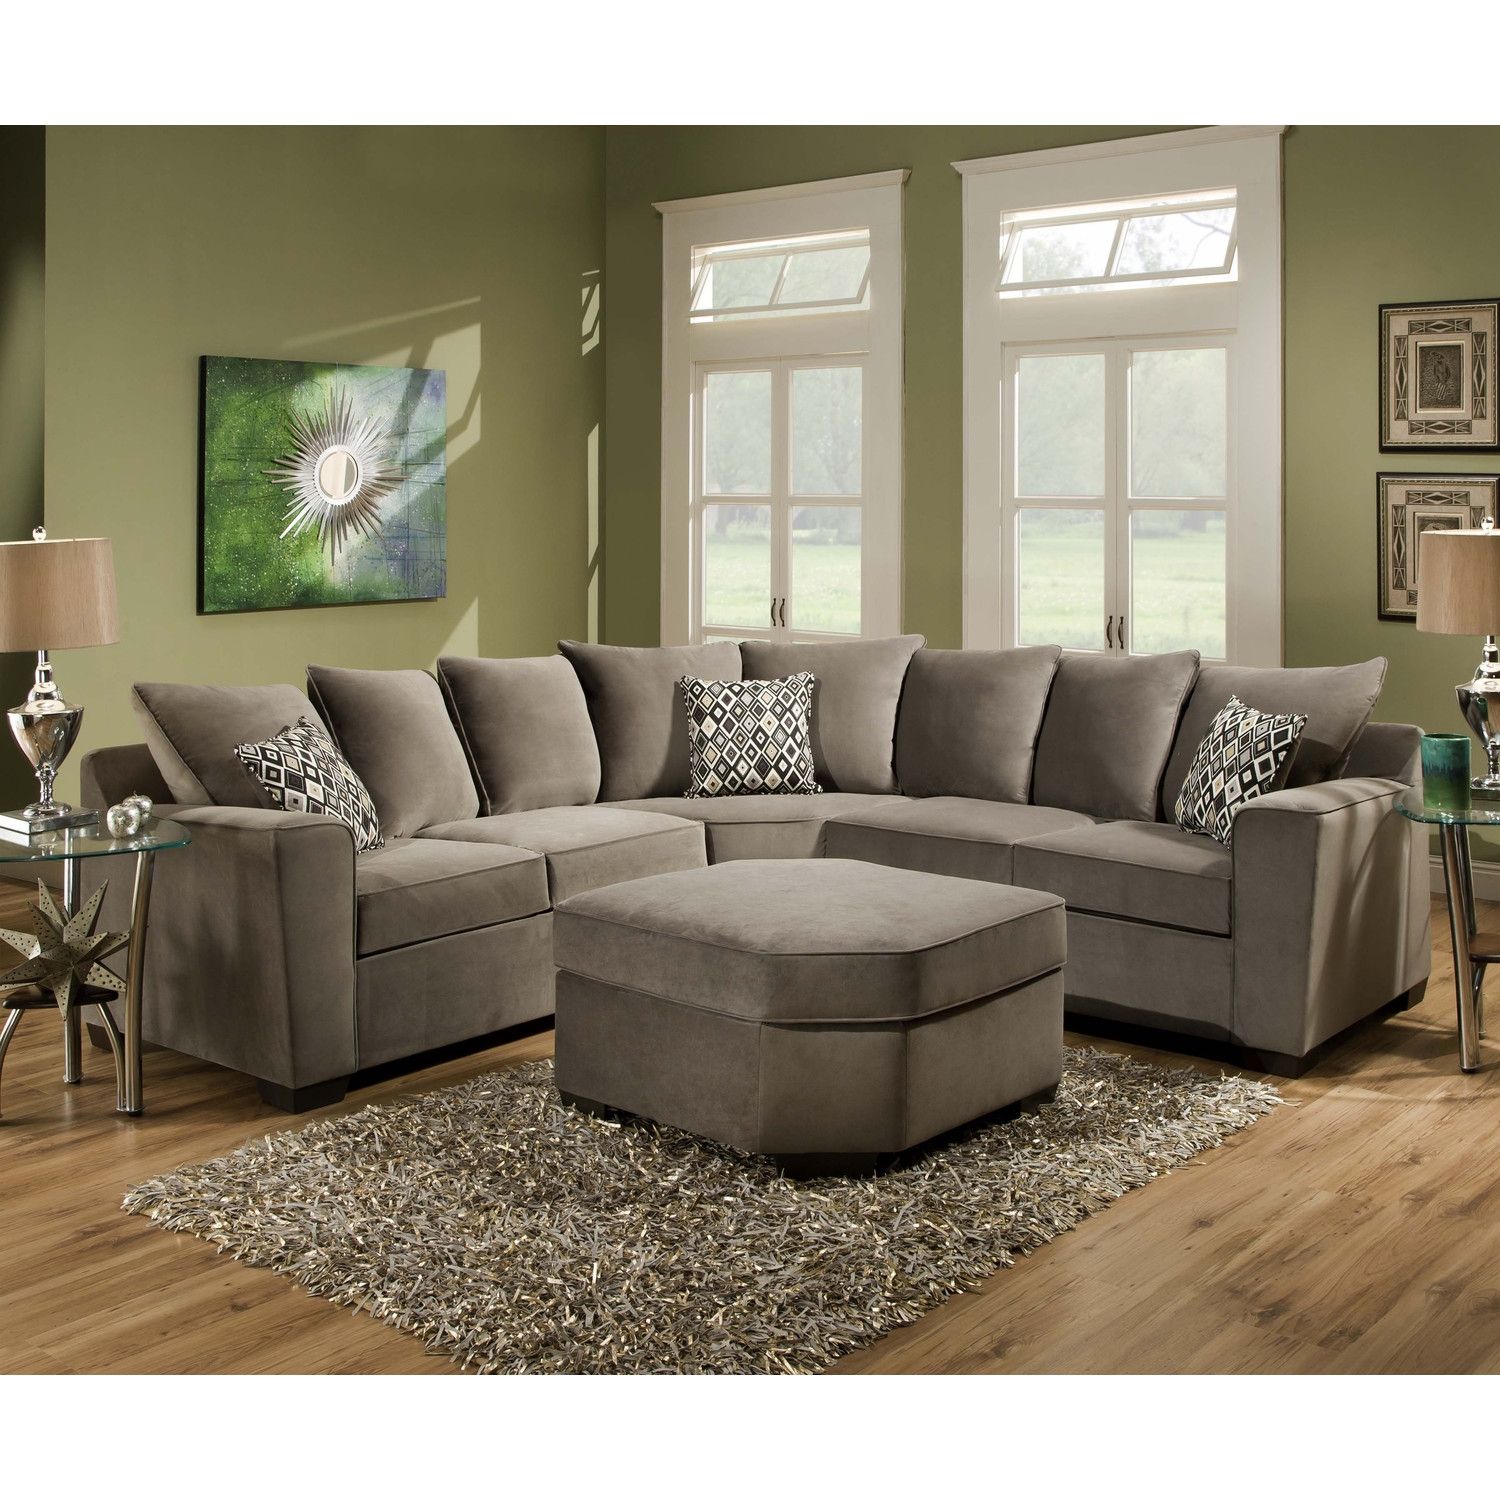 Furniture Comfy Design Of Oversized Couch For Charming Living Within Comfy Sectional Sofa (Photo 10 of 12)